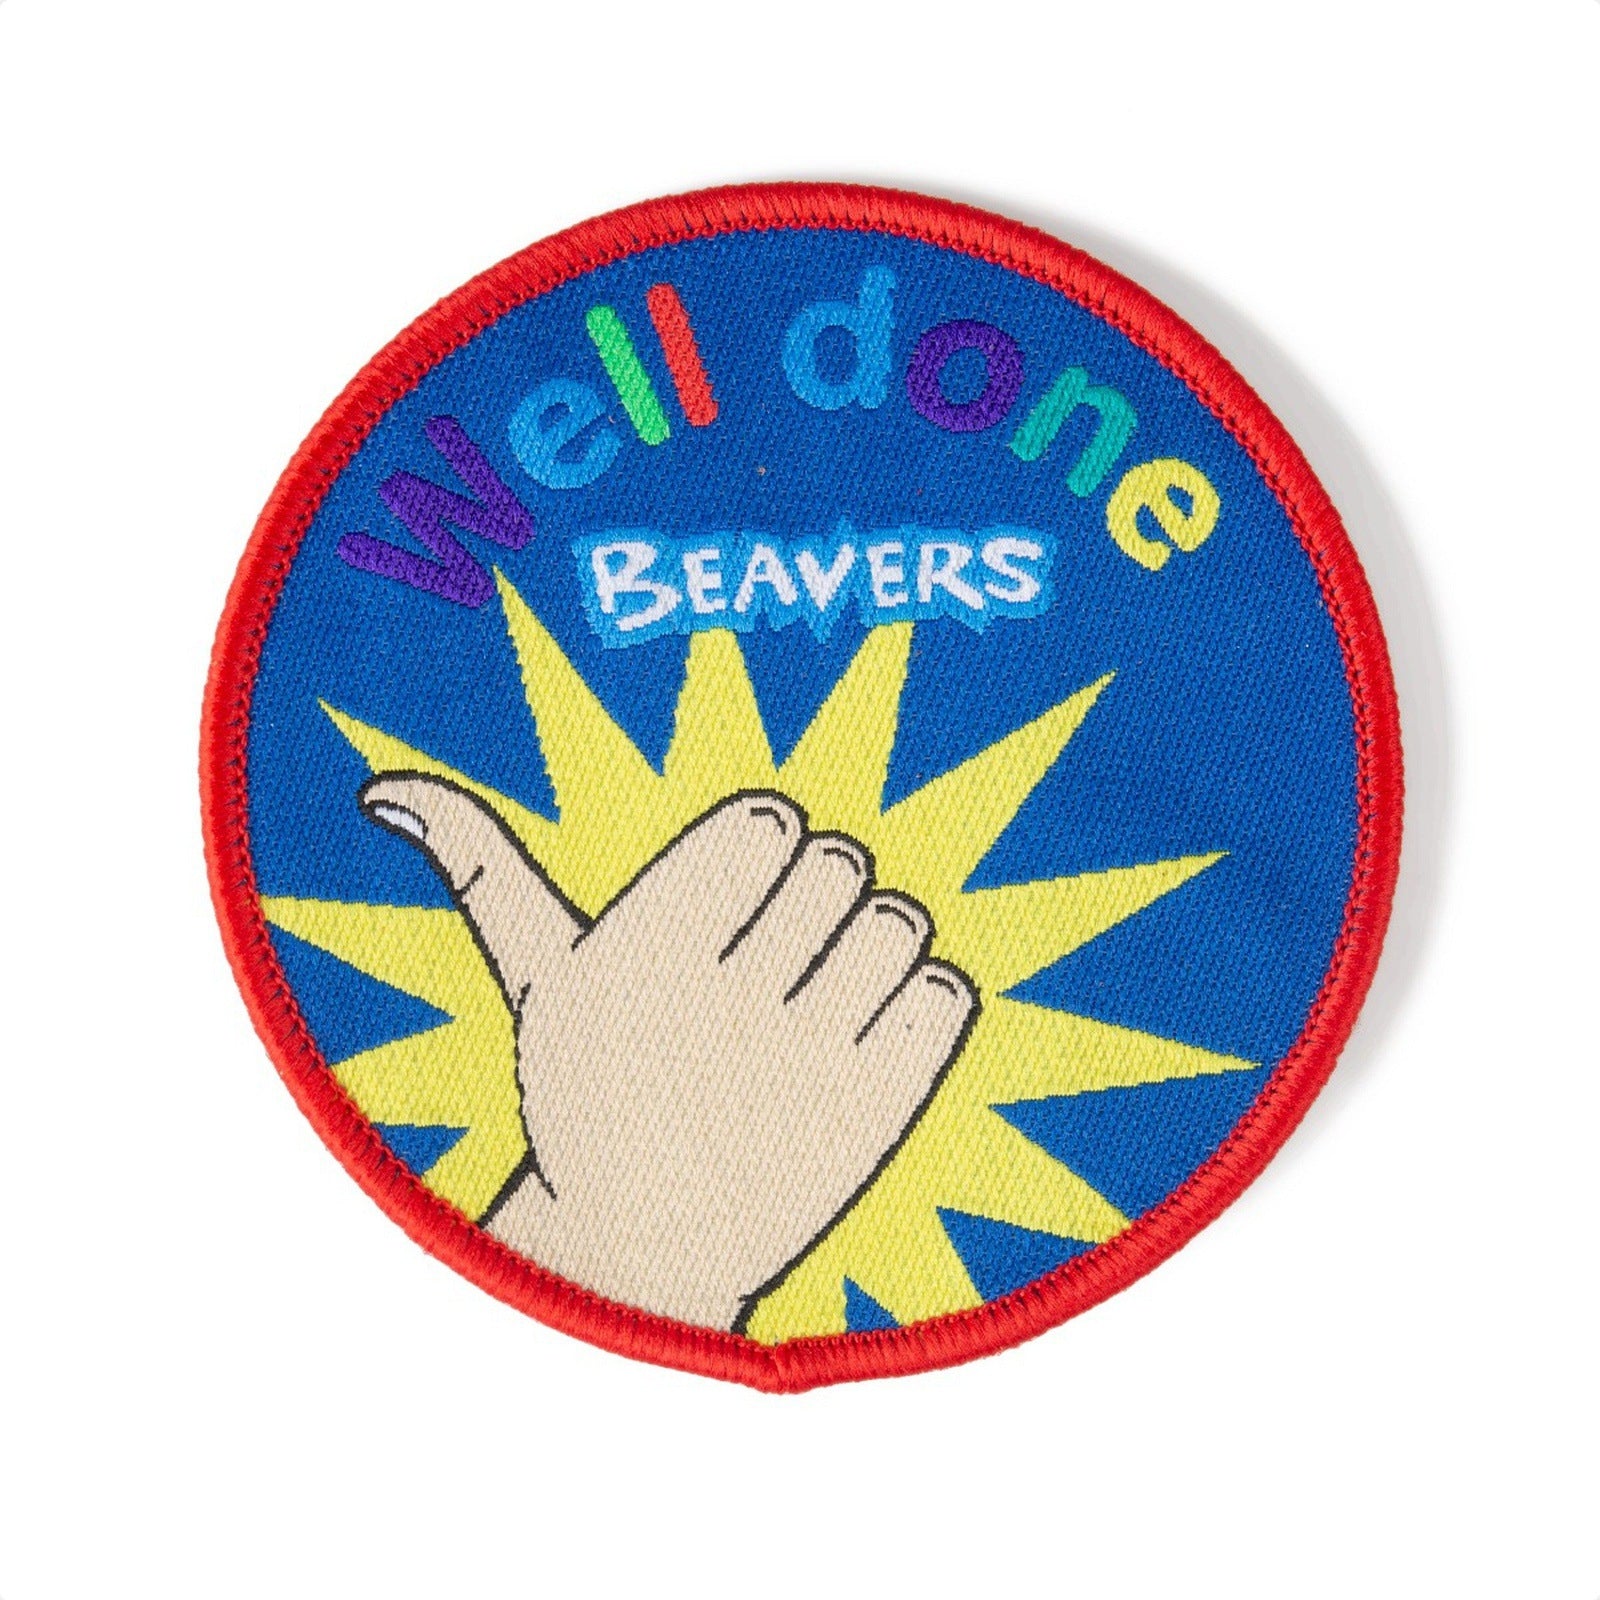 Beaver Scouts Well Done Fun Badge